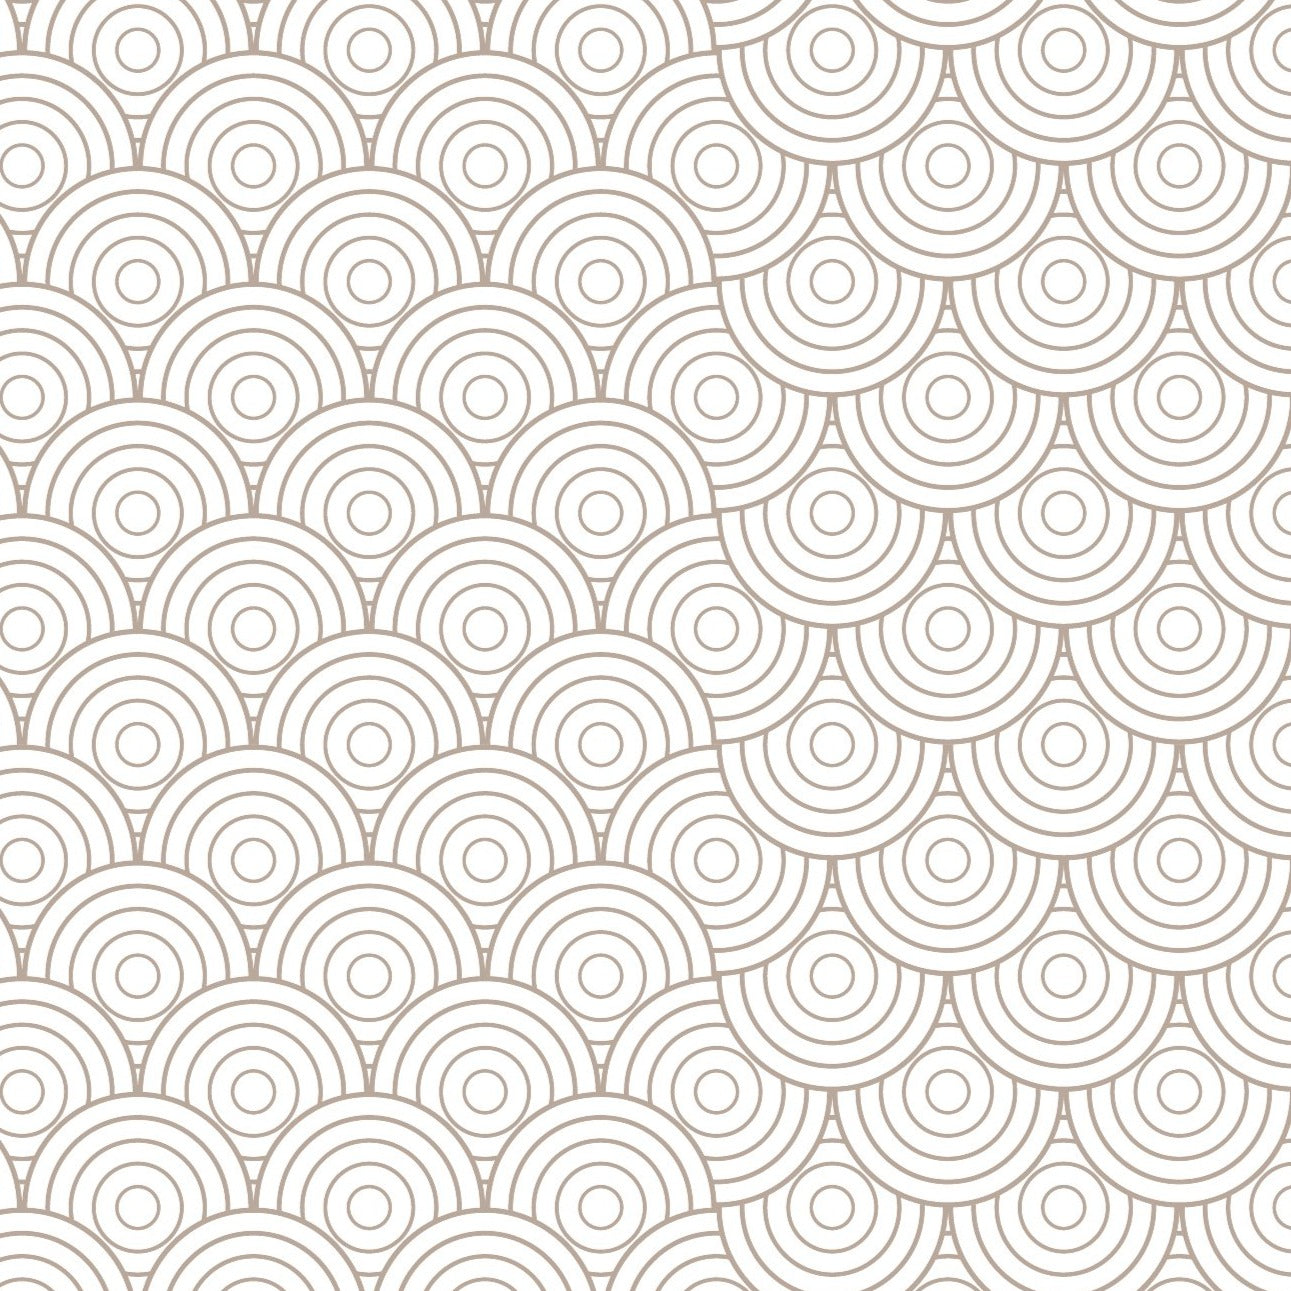 The seamless pattern of the Geometric Japanese Wallpaper is showcased, with its elegant array of overlapping circles in a soothing beige tone against a clean white background. The design brings a Zen-like quality and a touch of Japanese-inspired artistry to interior spaces.